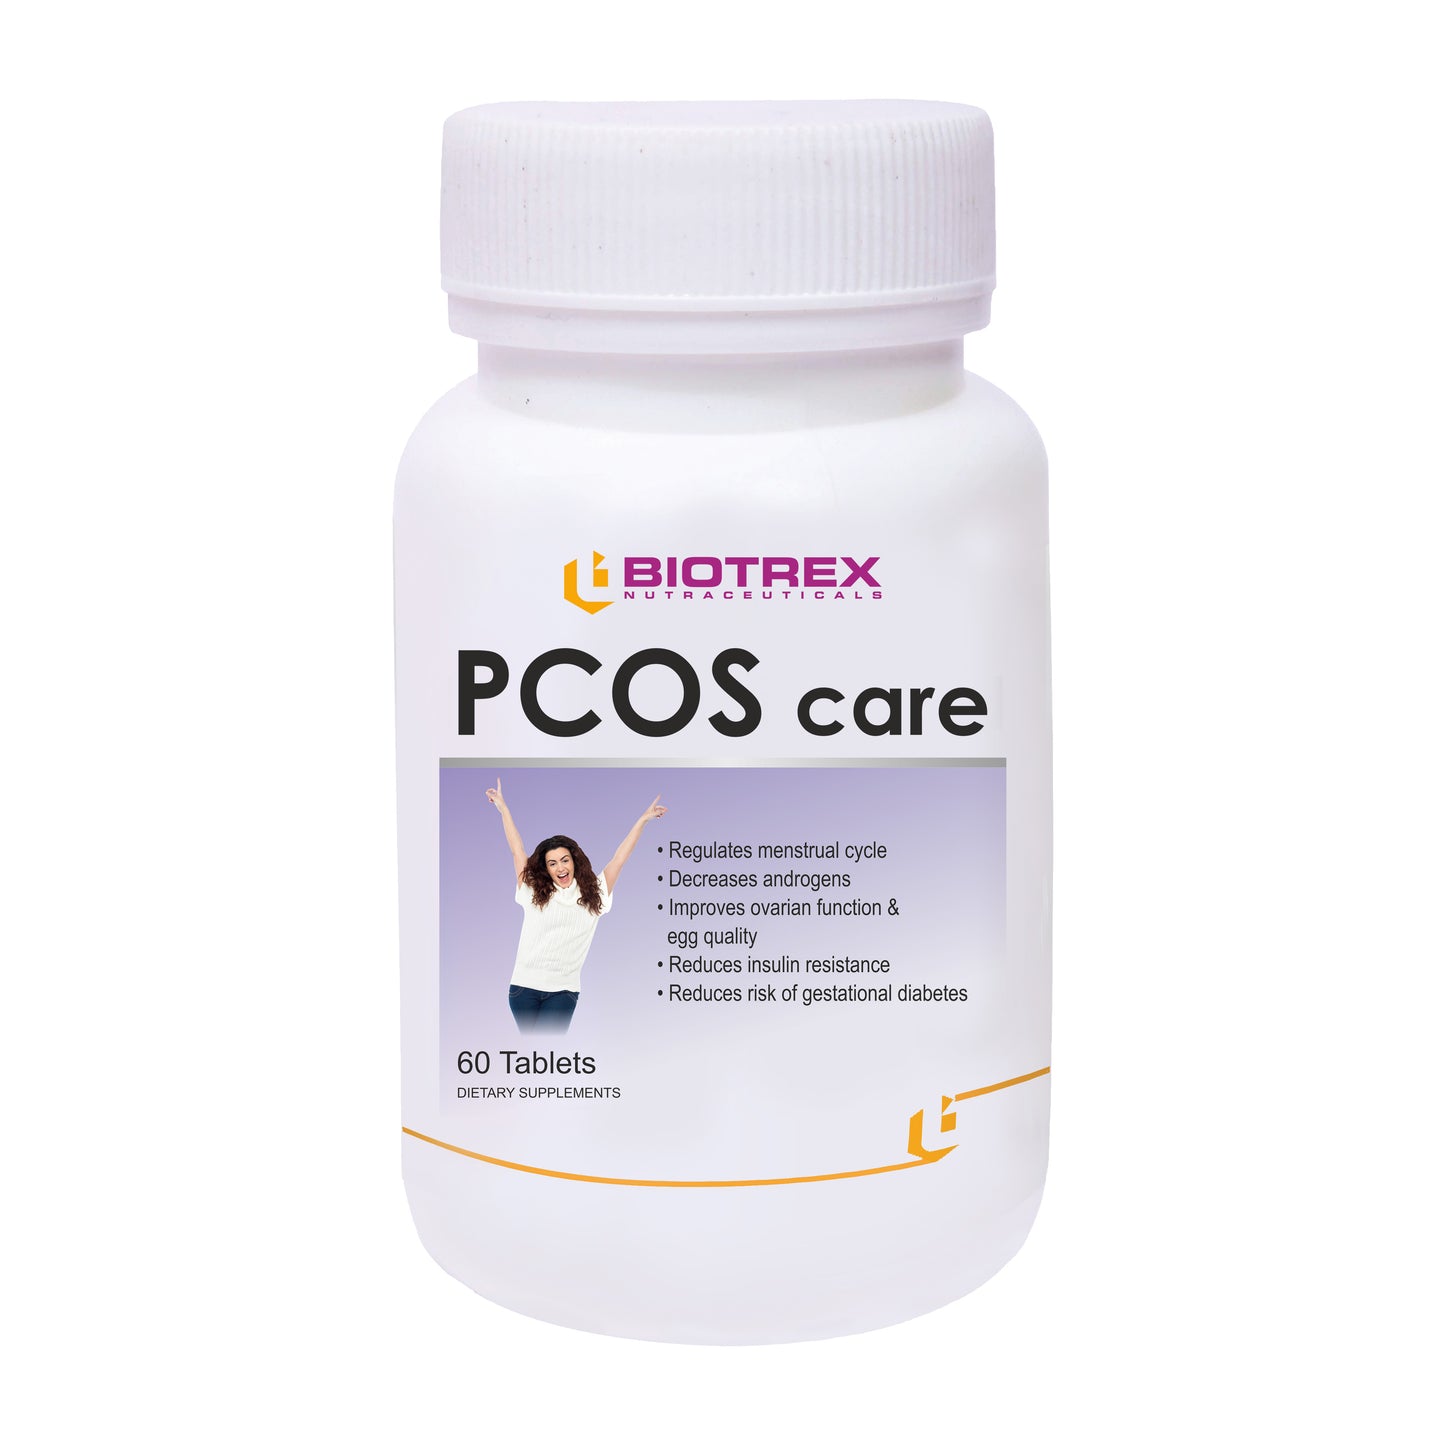 Biotrex Nutraceuticals Pcos Care Supplement, Natural Pcos/Pcod Supplement For Women - 60 Tablets